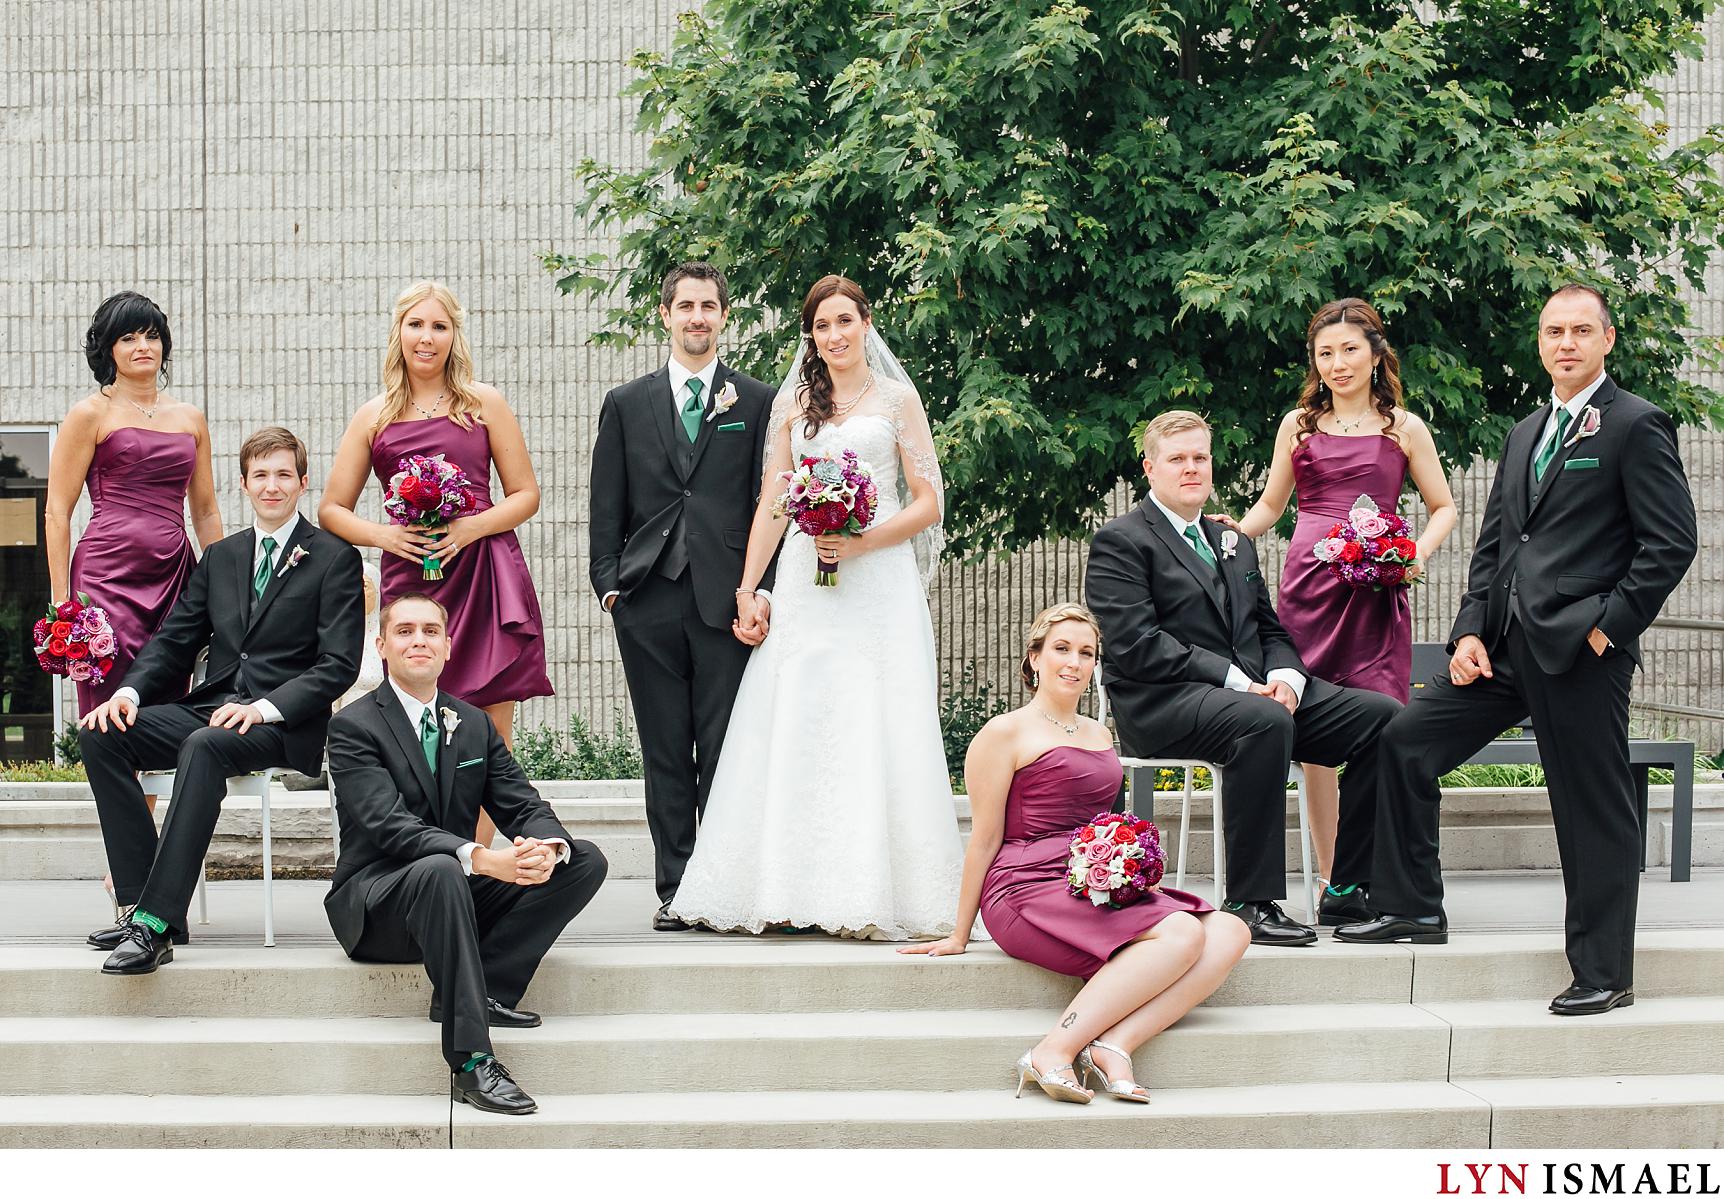 Wedding party portrait at the Art Gallery of Burlington's courtyard